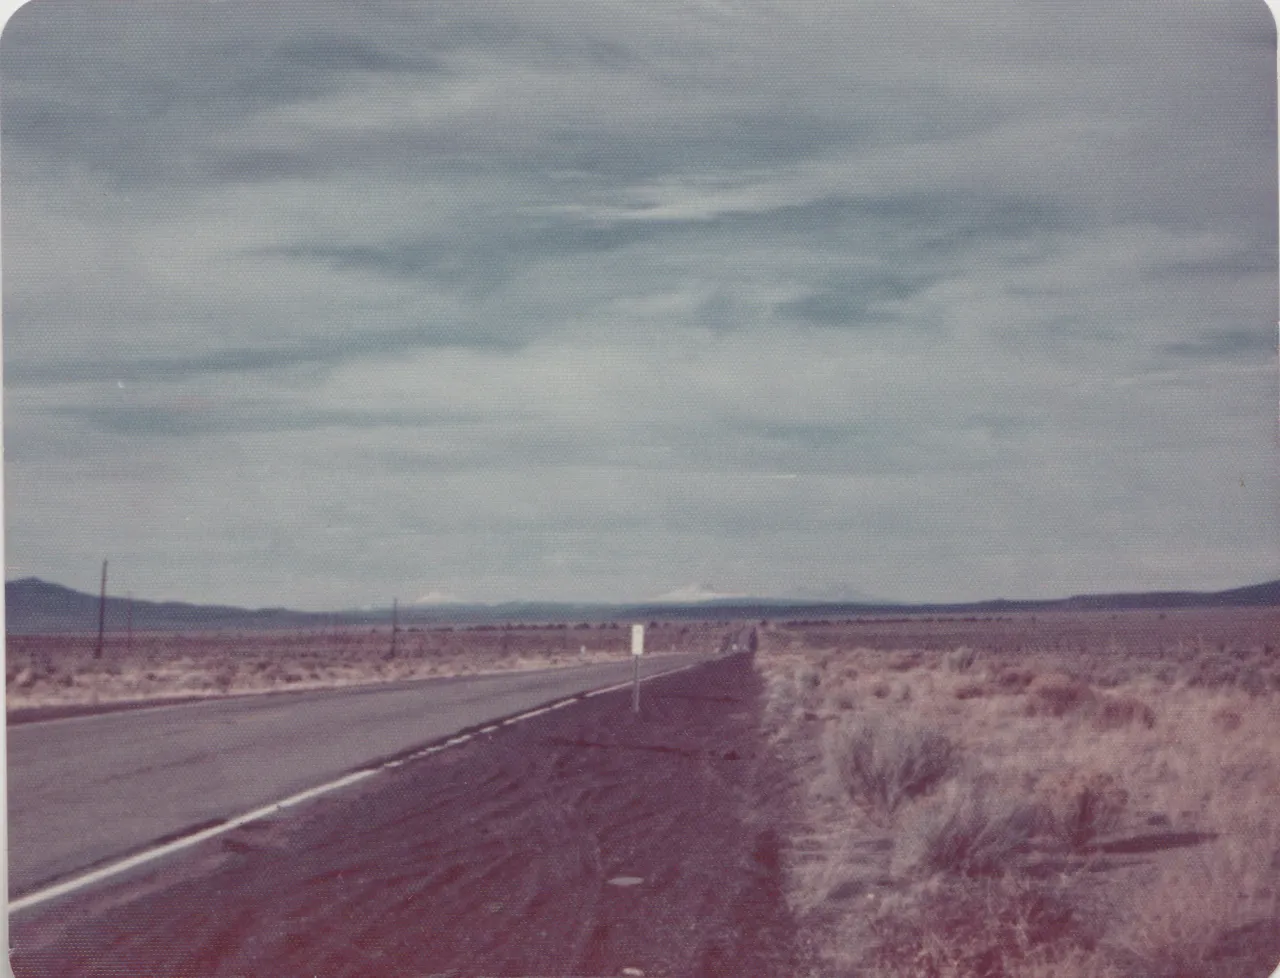 1974-11-24 - Sunday - Burns to Bend, a road in the wilderness, plains, blue mountains, cloudy sky, flat brush land, 1pic.png